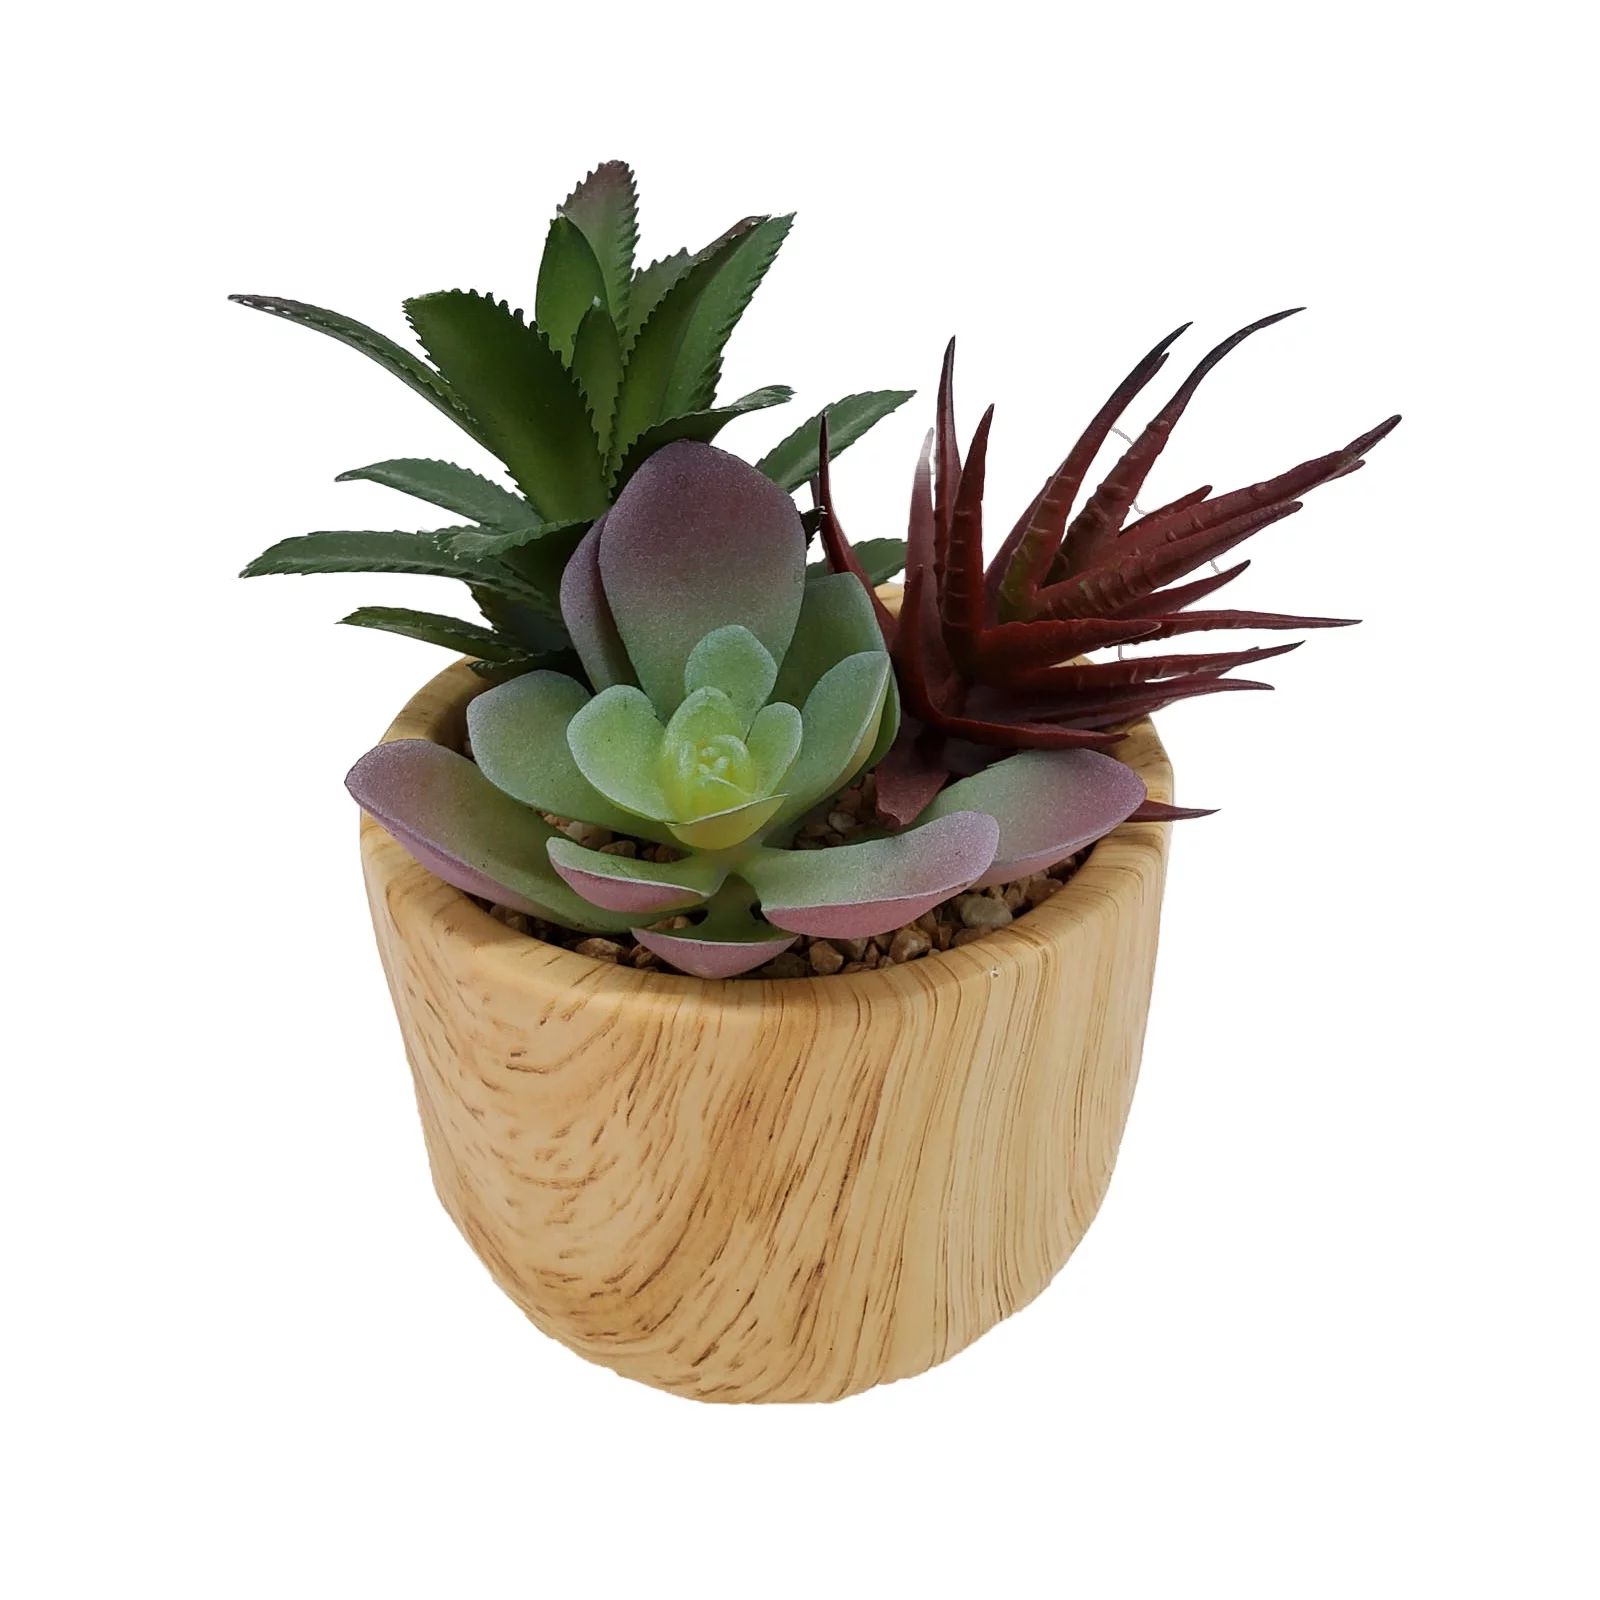 Mainstays 5 inch Artificial Plant, Succulent in Pot, Green Color, Assembled Weight: 17OZ | Walmart (US)